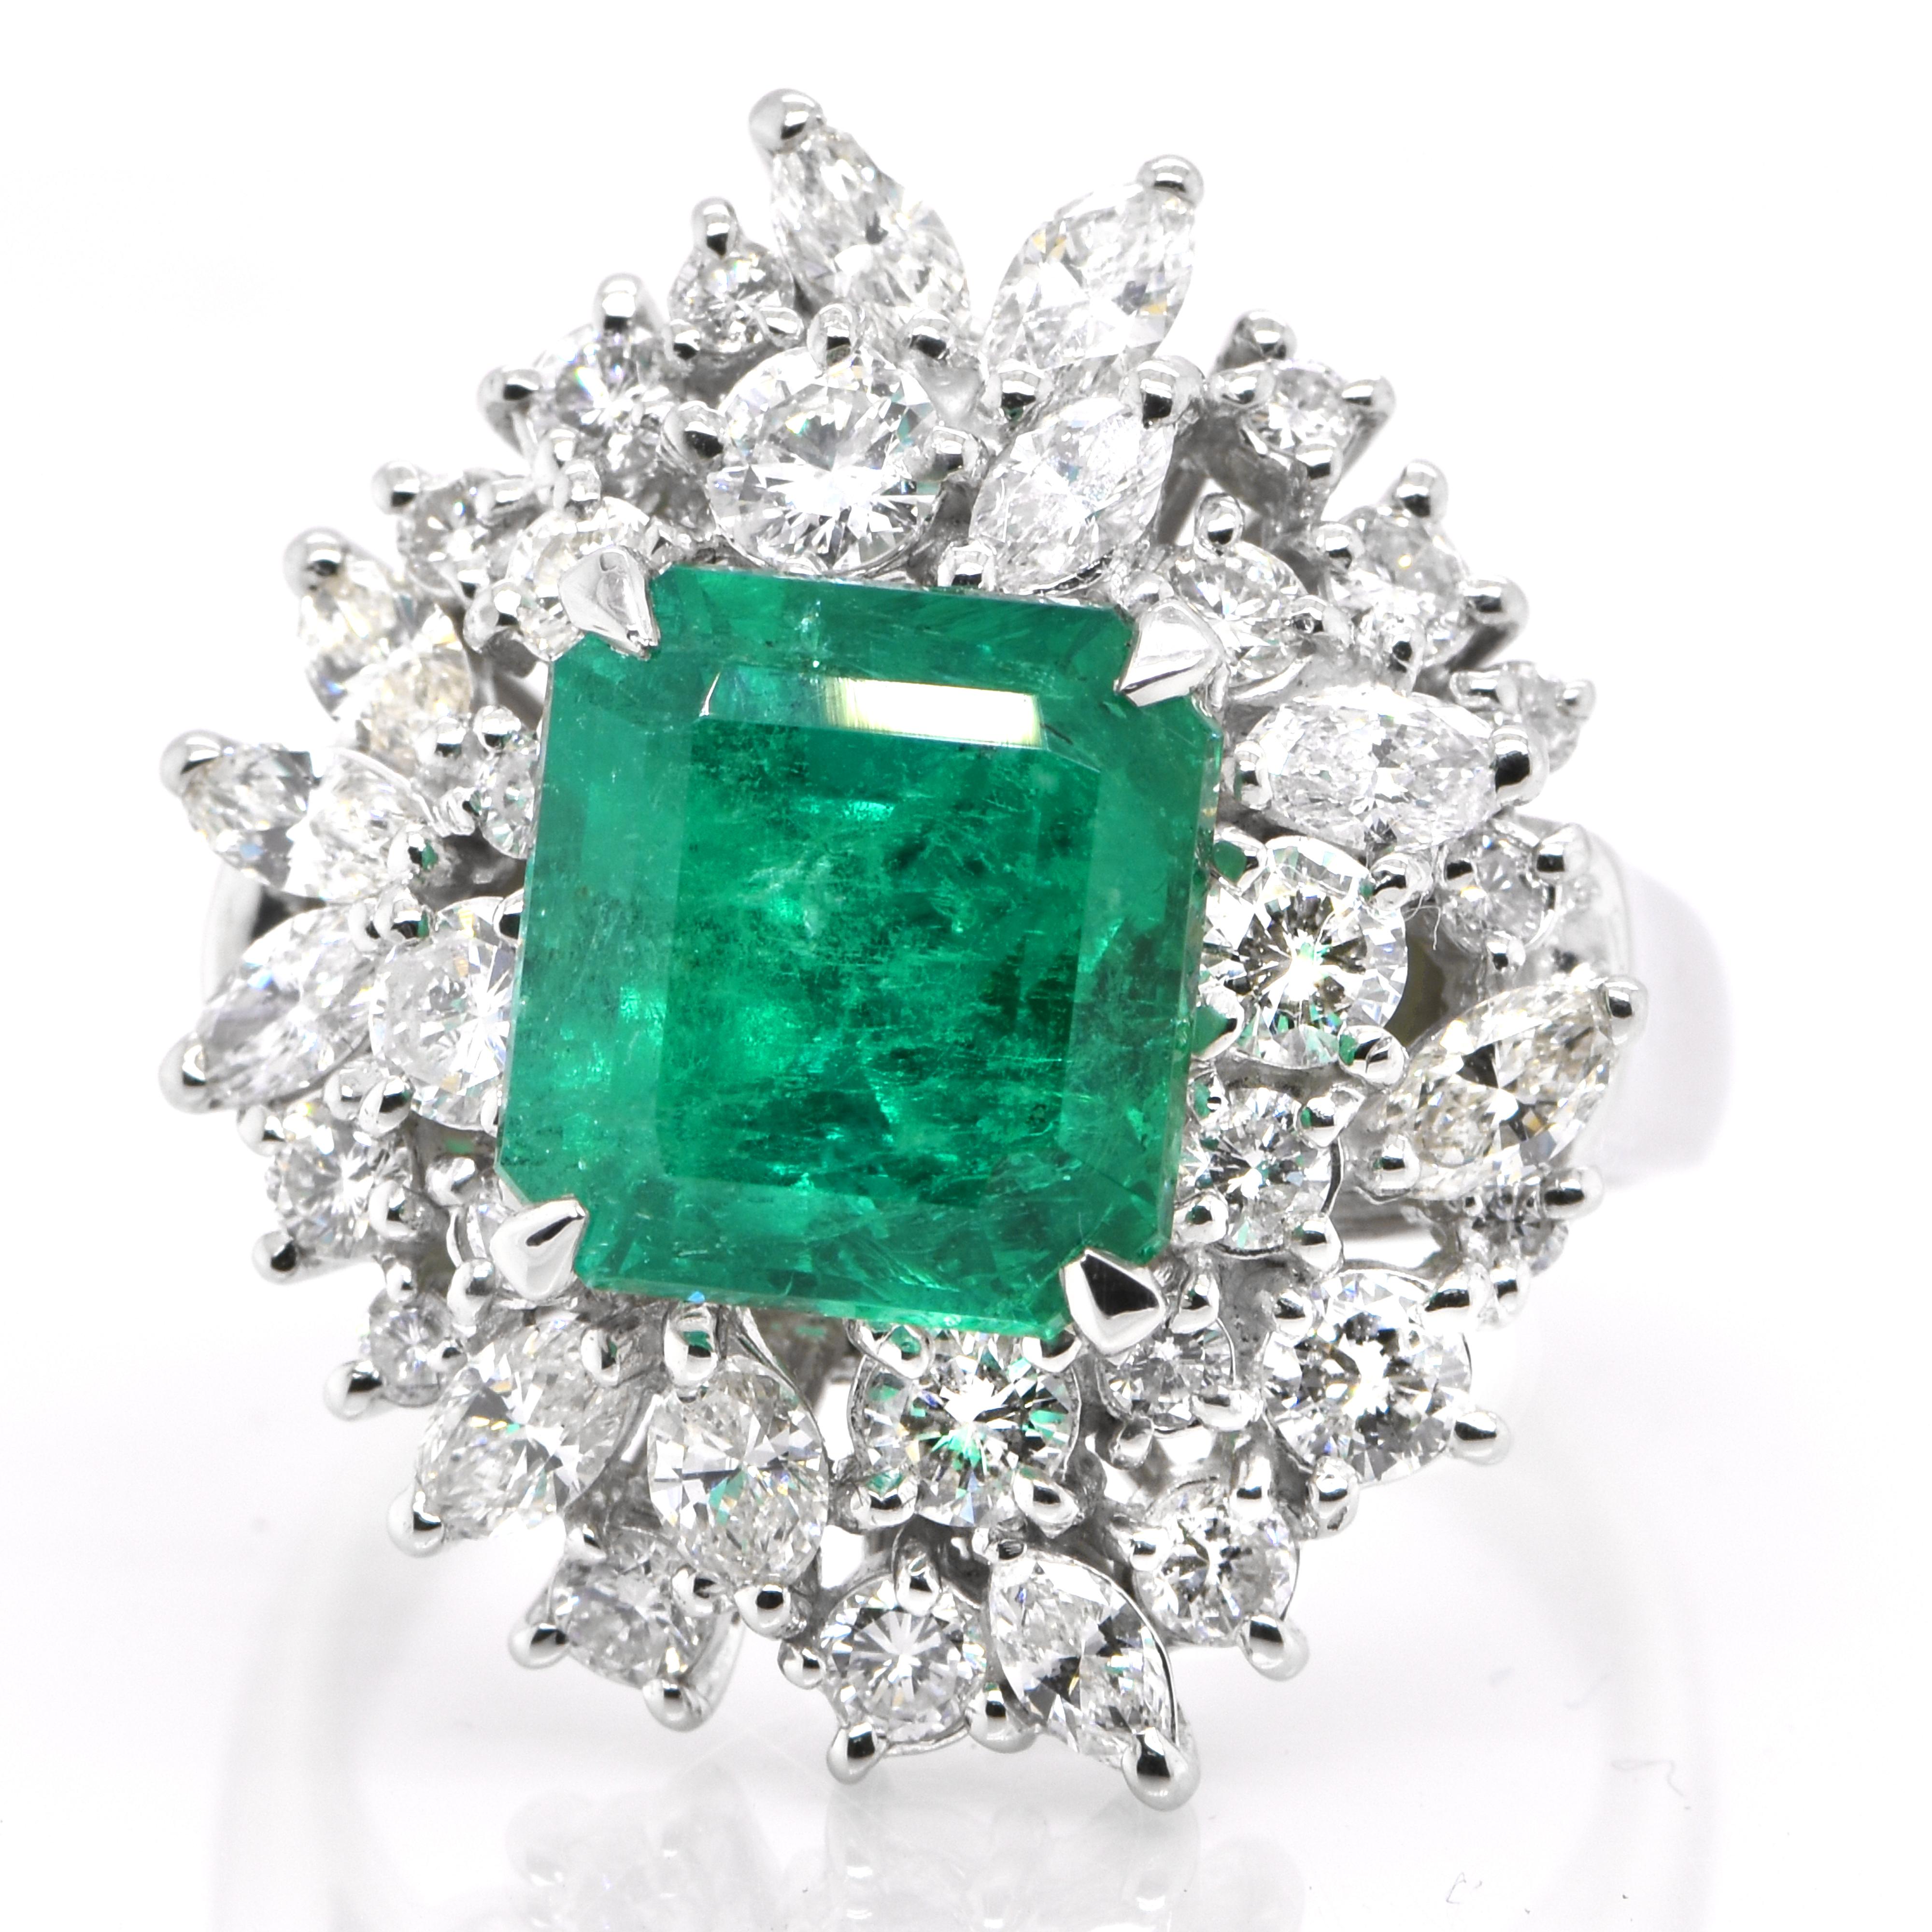 A stunning ring featuring a 4.61 Carat Natural Colombian Emerald and 2.10 Carats of Diamond Accents set in Platinum. People have admired emerald’s green for thousands of years. Emeralds have always been associated with the lushest landscapes and the